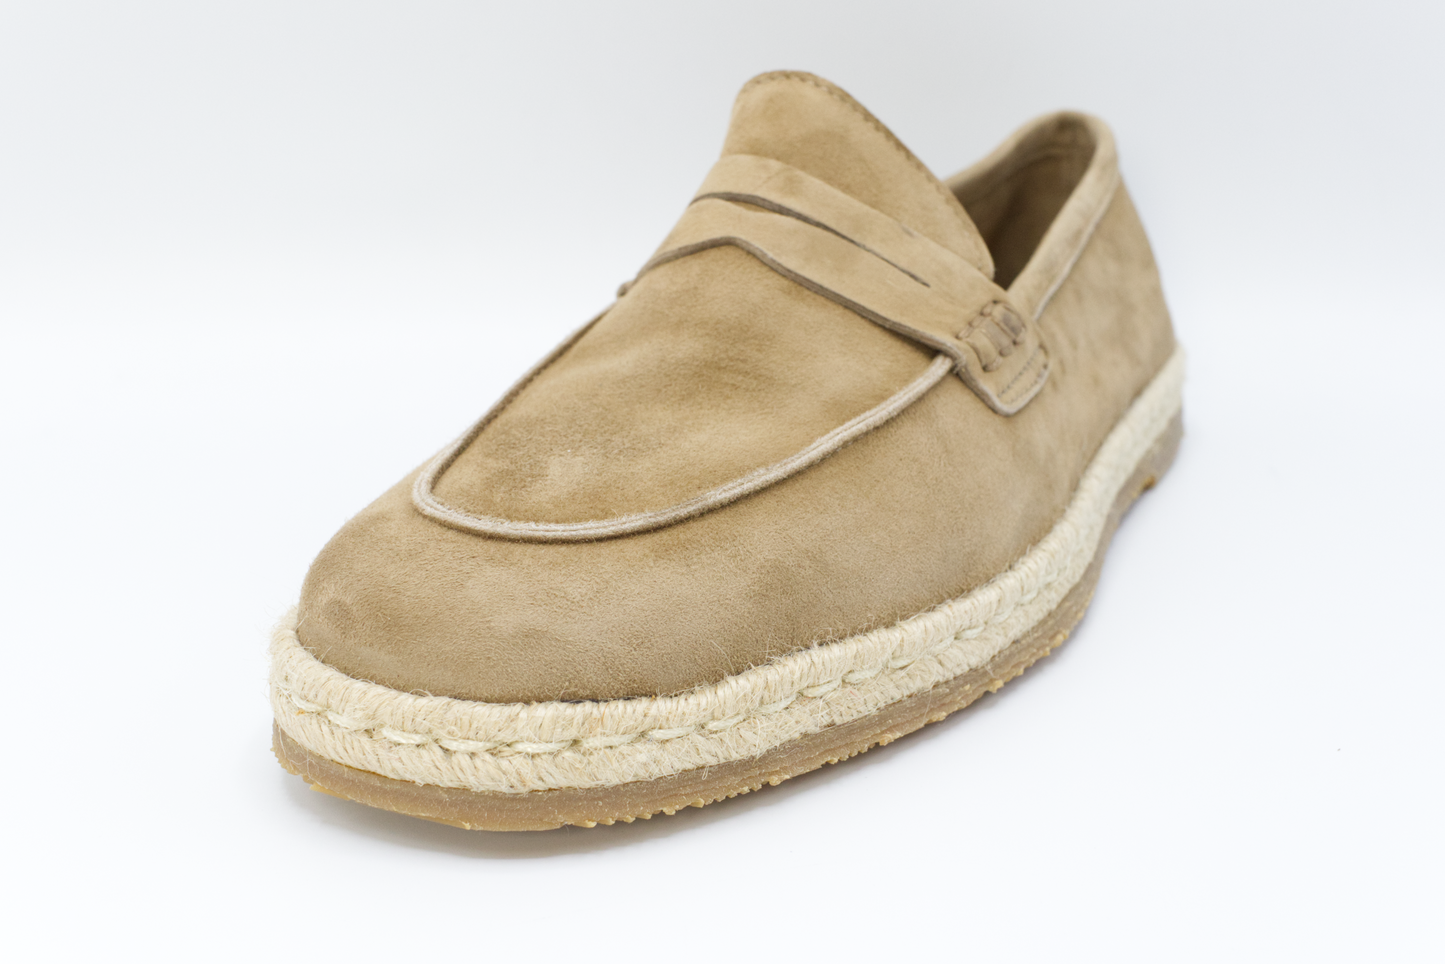 Shop Handmade Men's Suede Espadrille Style Loafer in Beige or browse our range of hand-made Italian sneakers for men in leather or suede. We deliver to the USA and Canada & offer multiple payment plans as well as accept multiple safe & secure payment methods.